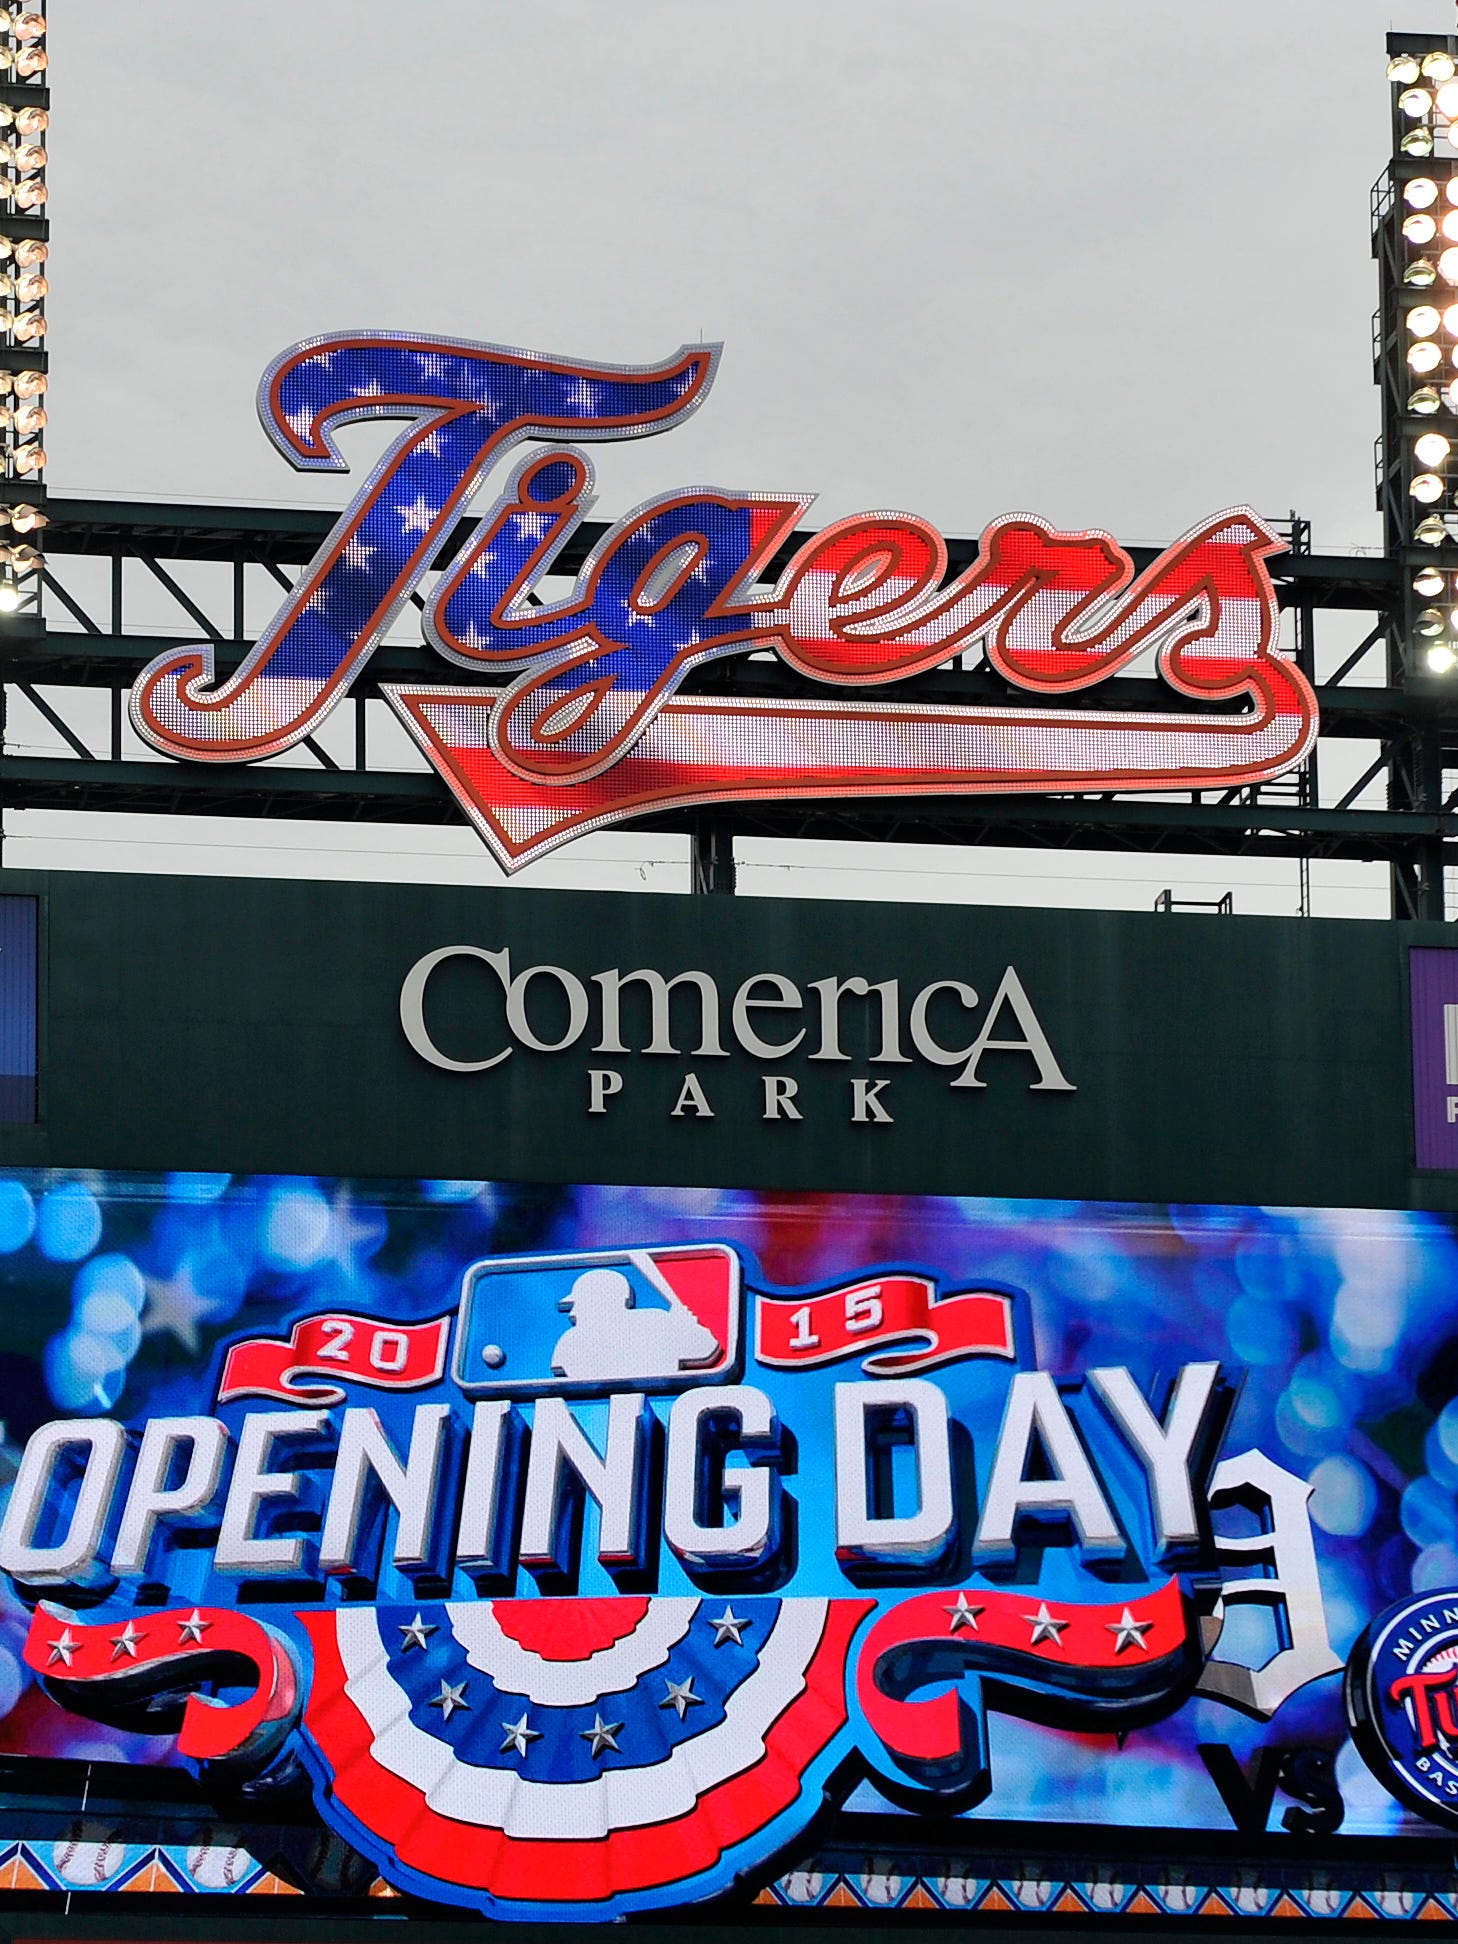 The scoreboard out in left field is ready for Opening Day in Detroit as the Tigers kick off the 2015 season against the Minnesota Twins at Comerica Park in Detroit.  Photos taken on Monday, April 6, 2015.